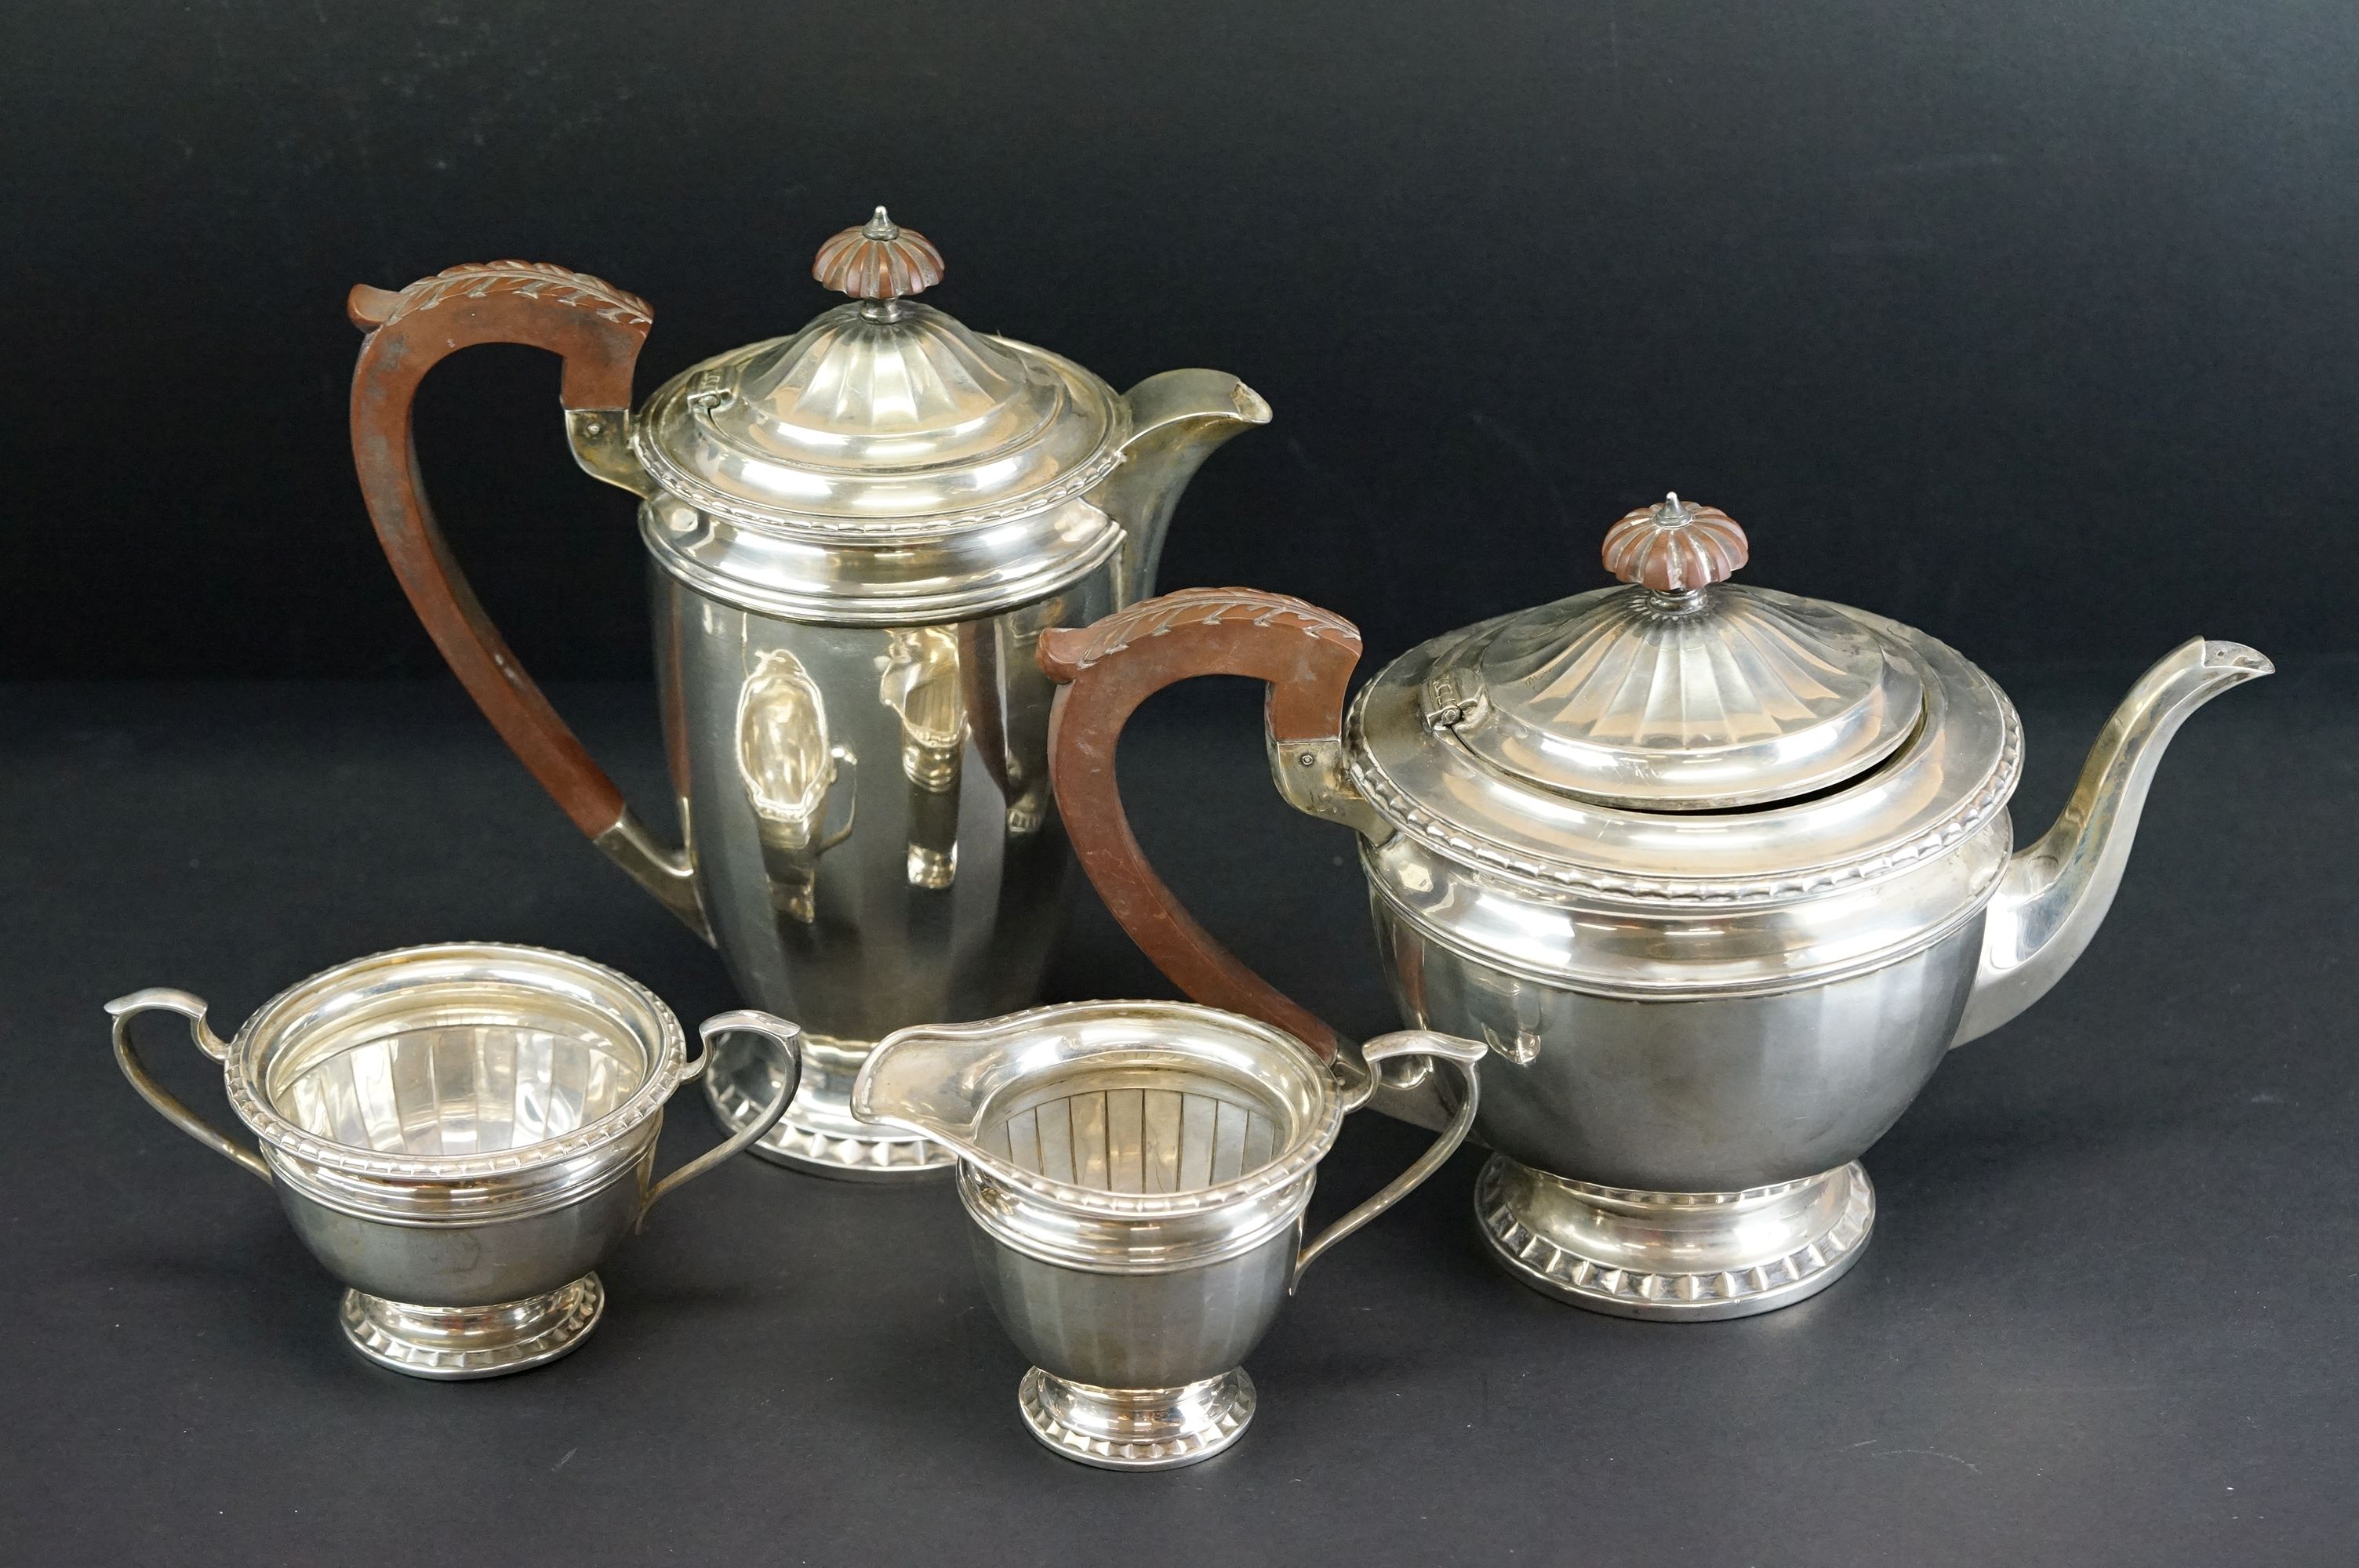 Barker Brothers 1930s silver four piece tea service comprising a teapot, hot water pot, twin-handled